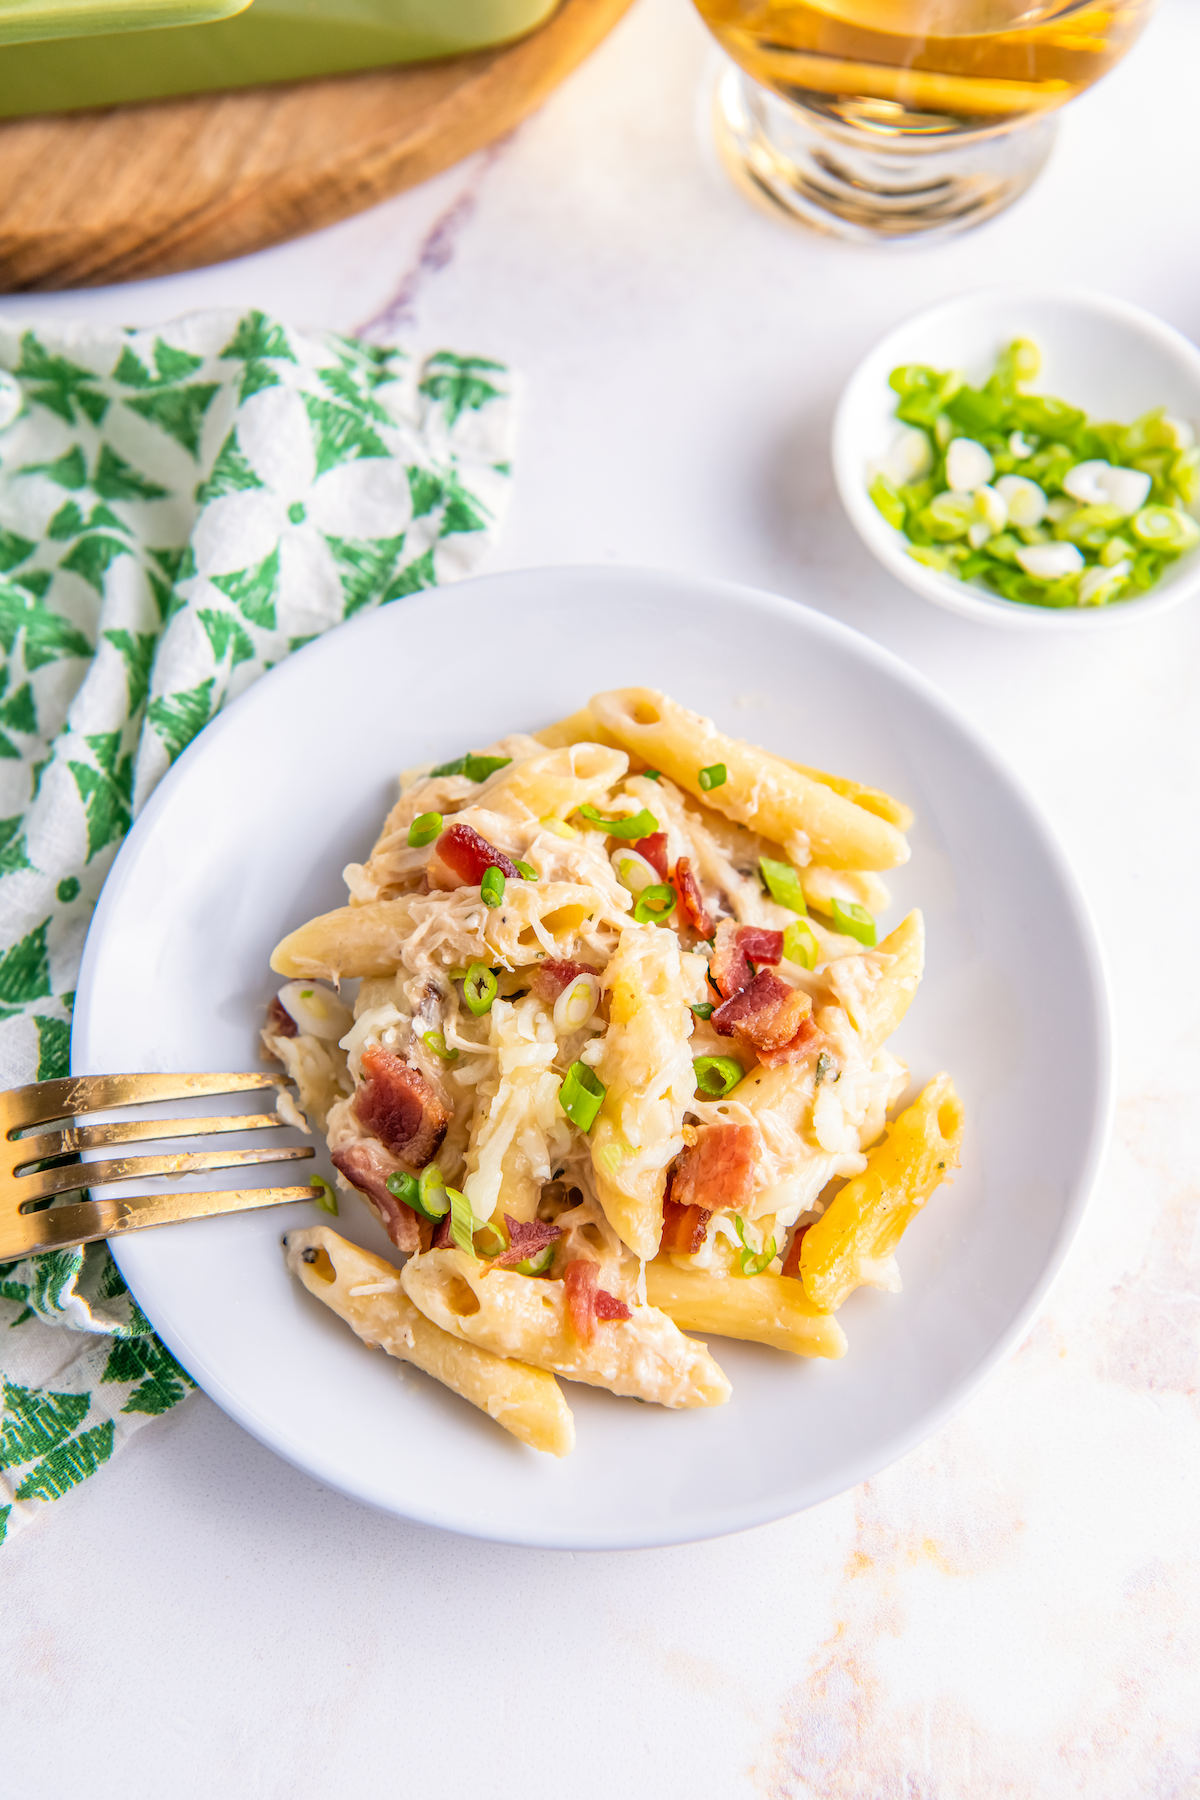 Plate of cheesy chicken pasta with bacon bits.